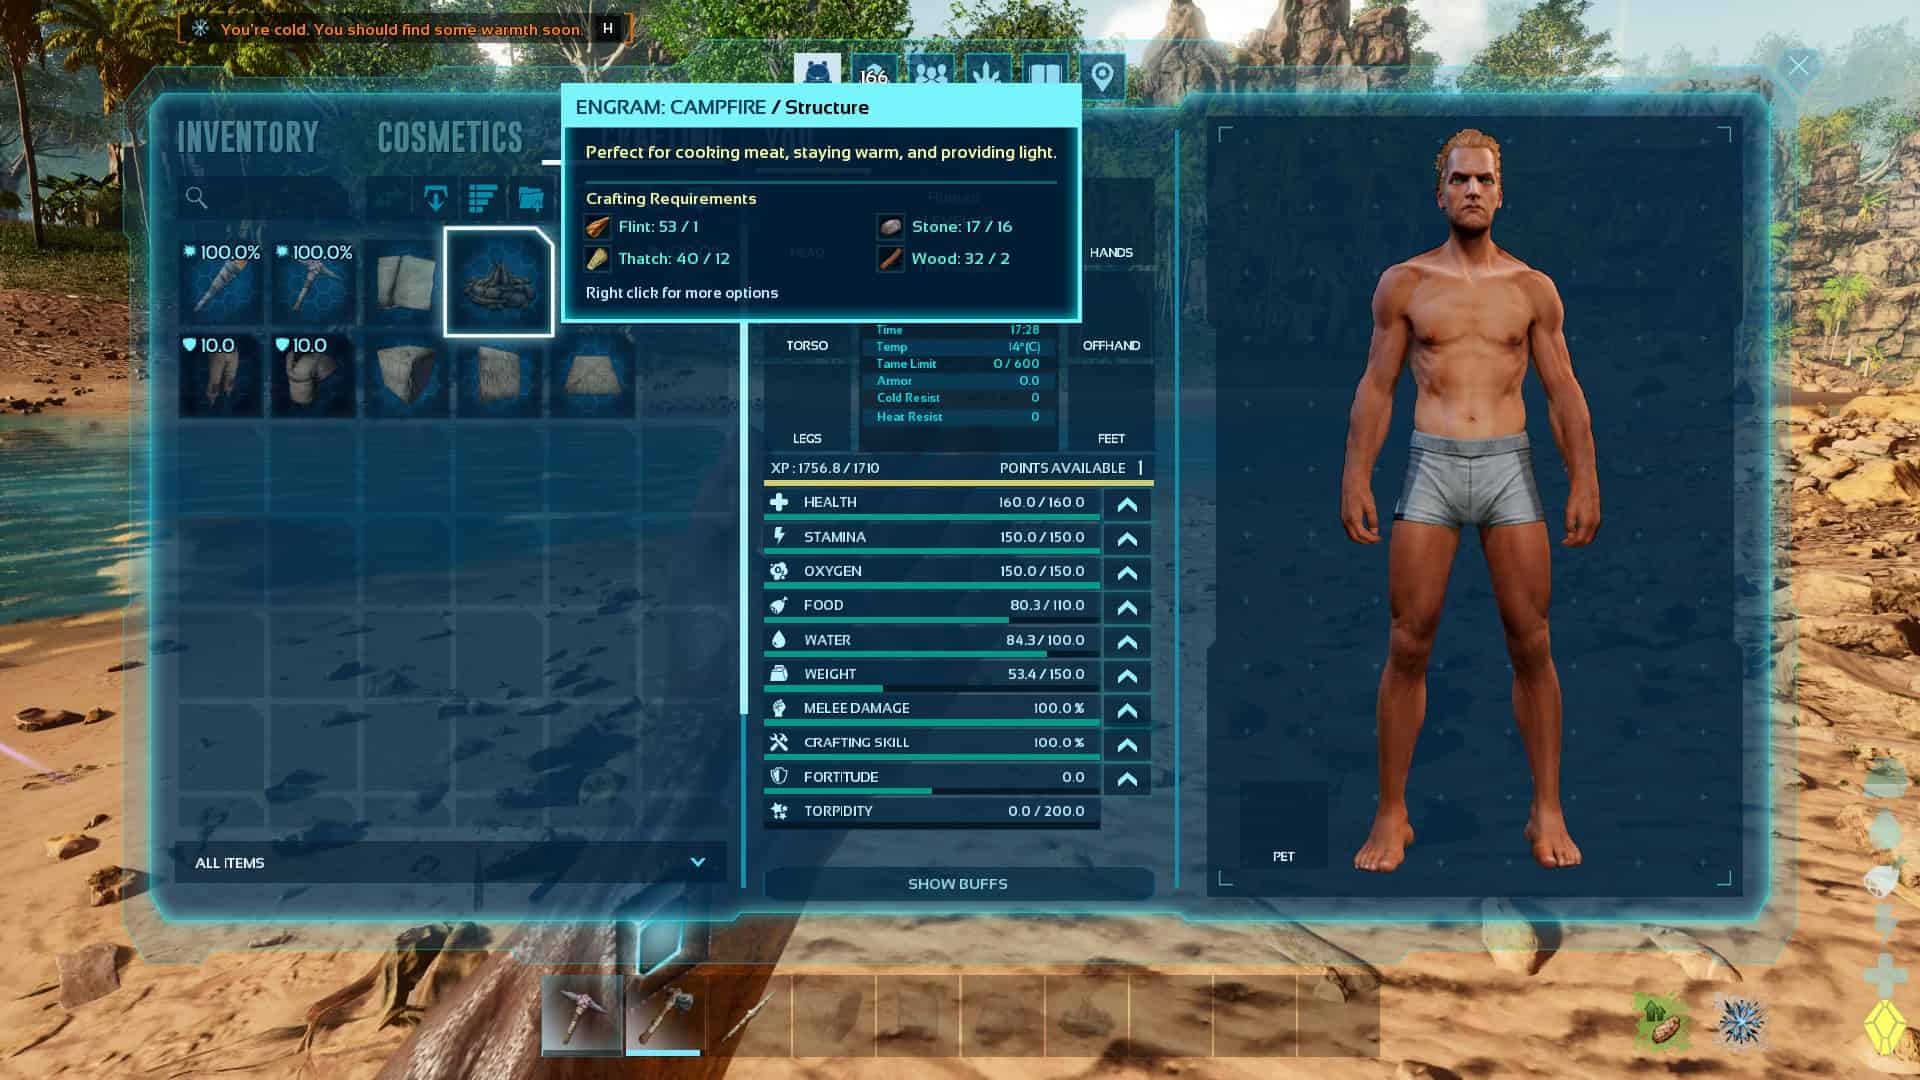 ARK Survival Ascended how to light campfire: The campfire in the crafting menu.